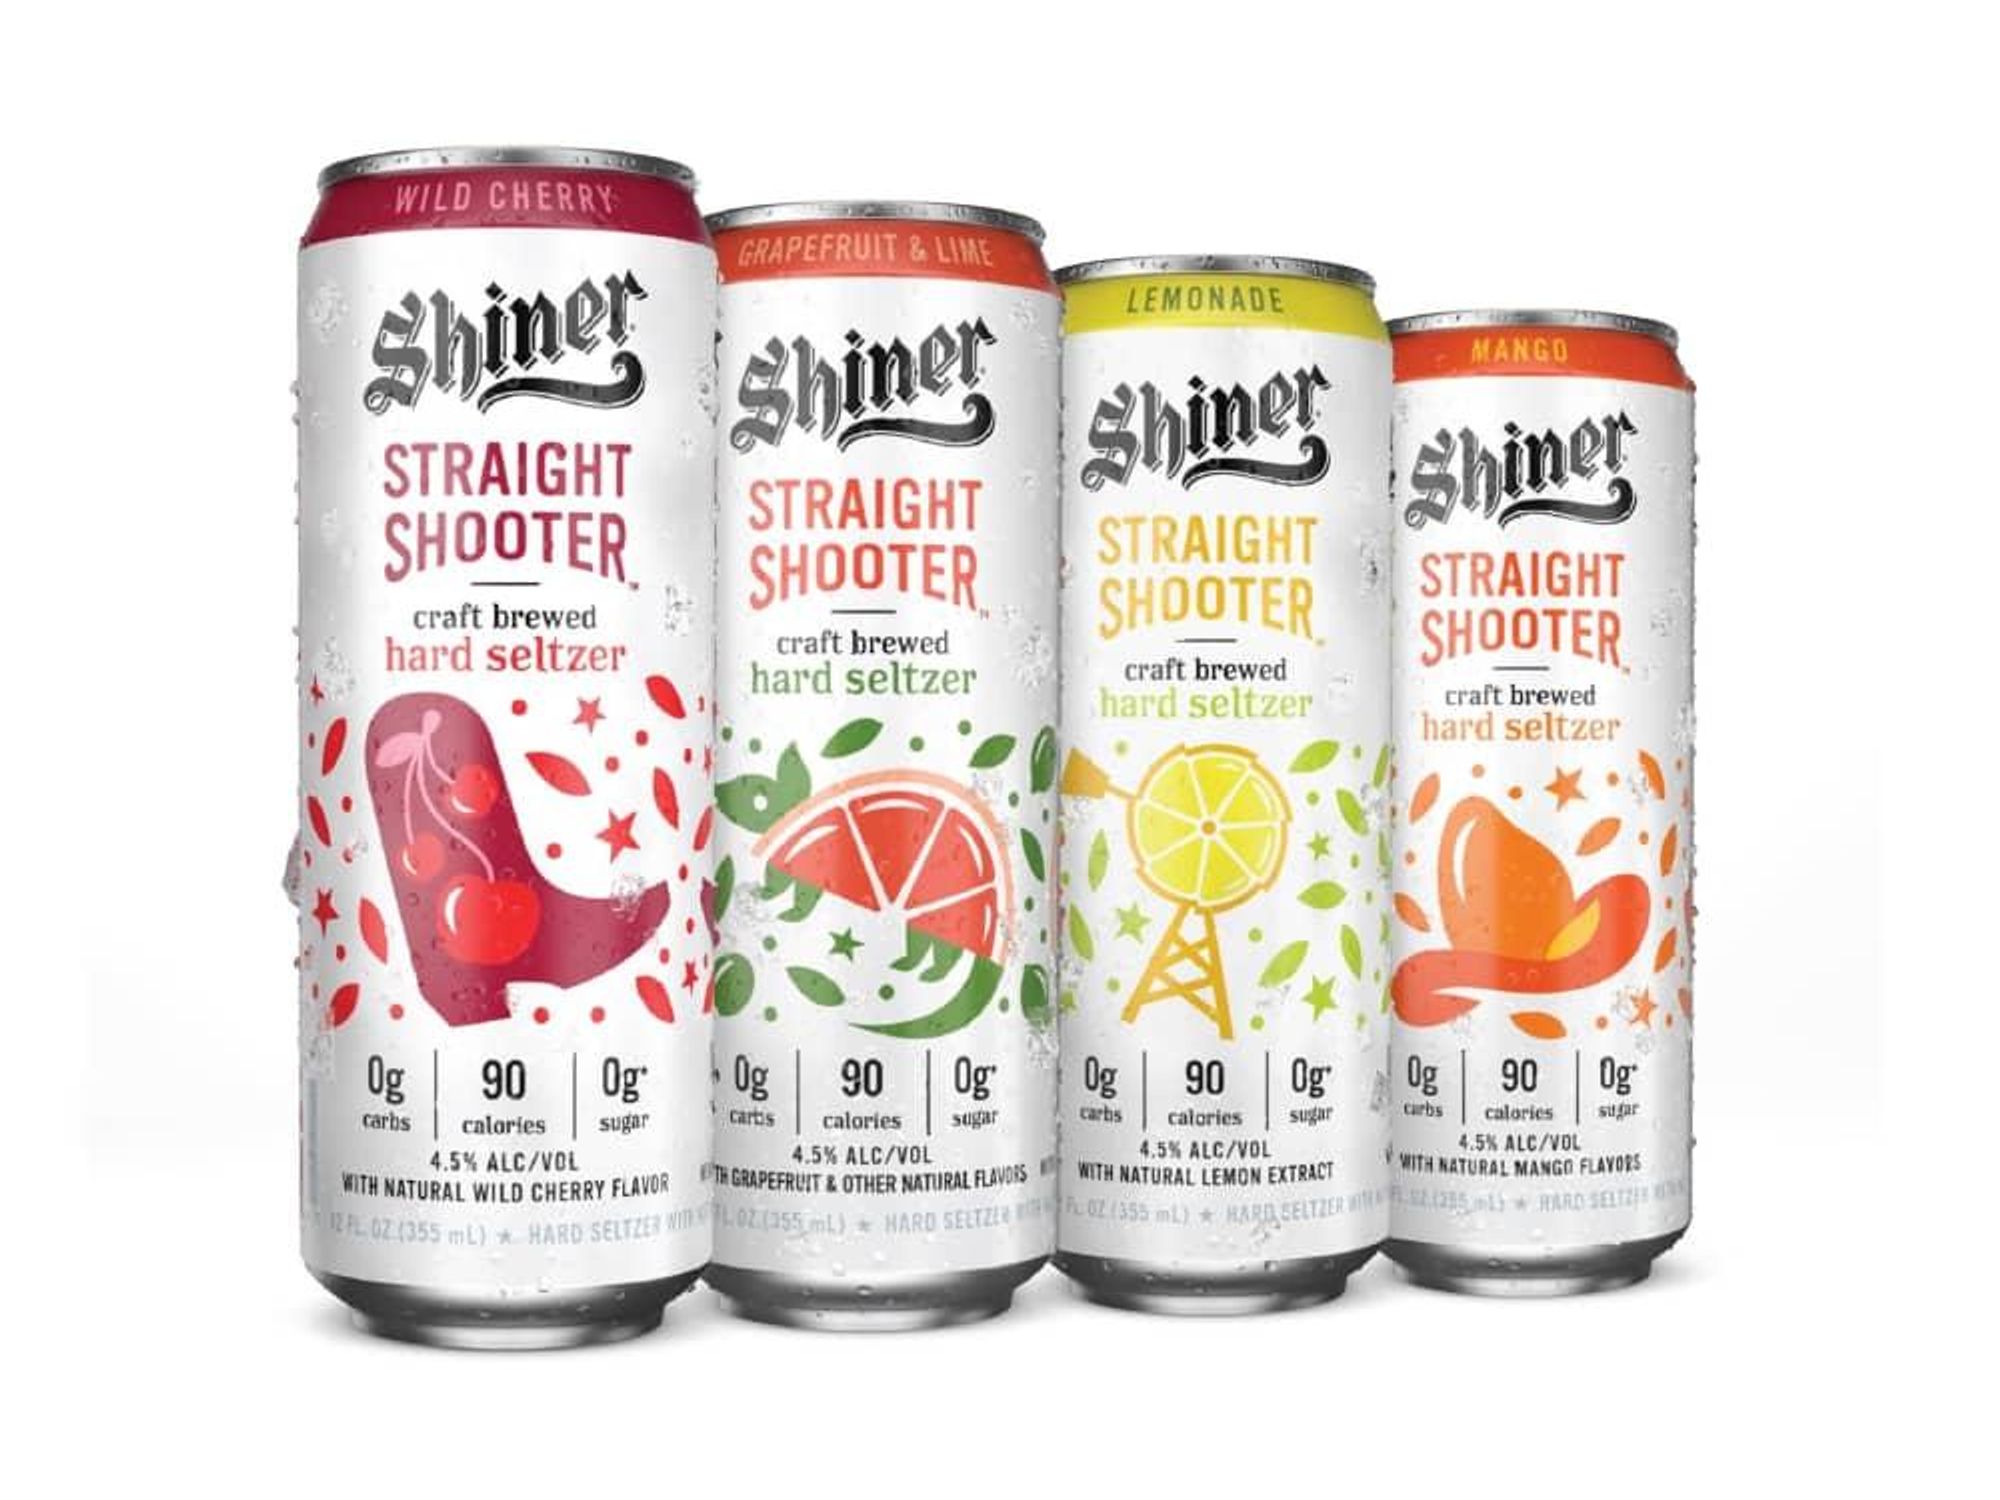 Shiner straight shooter hard seltzer cans